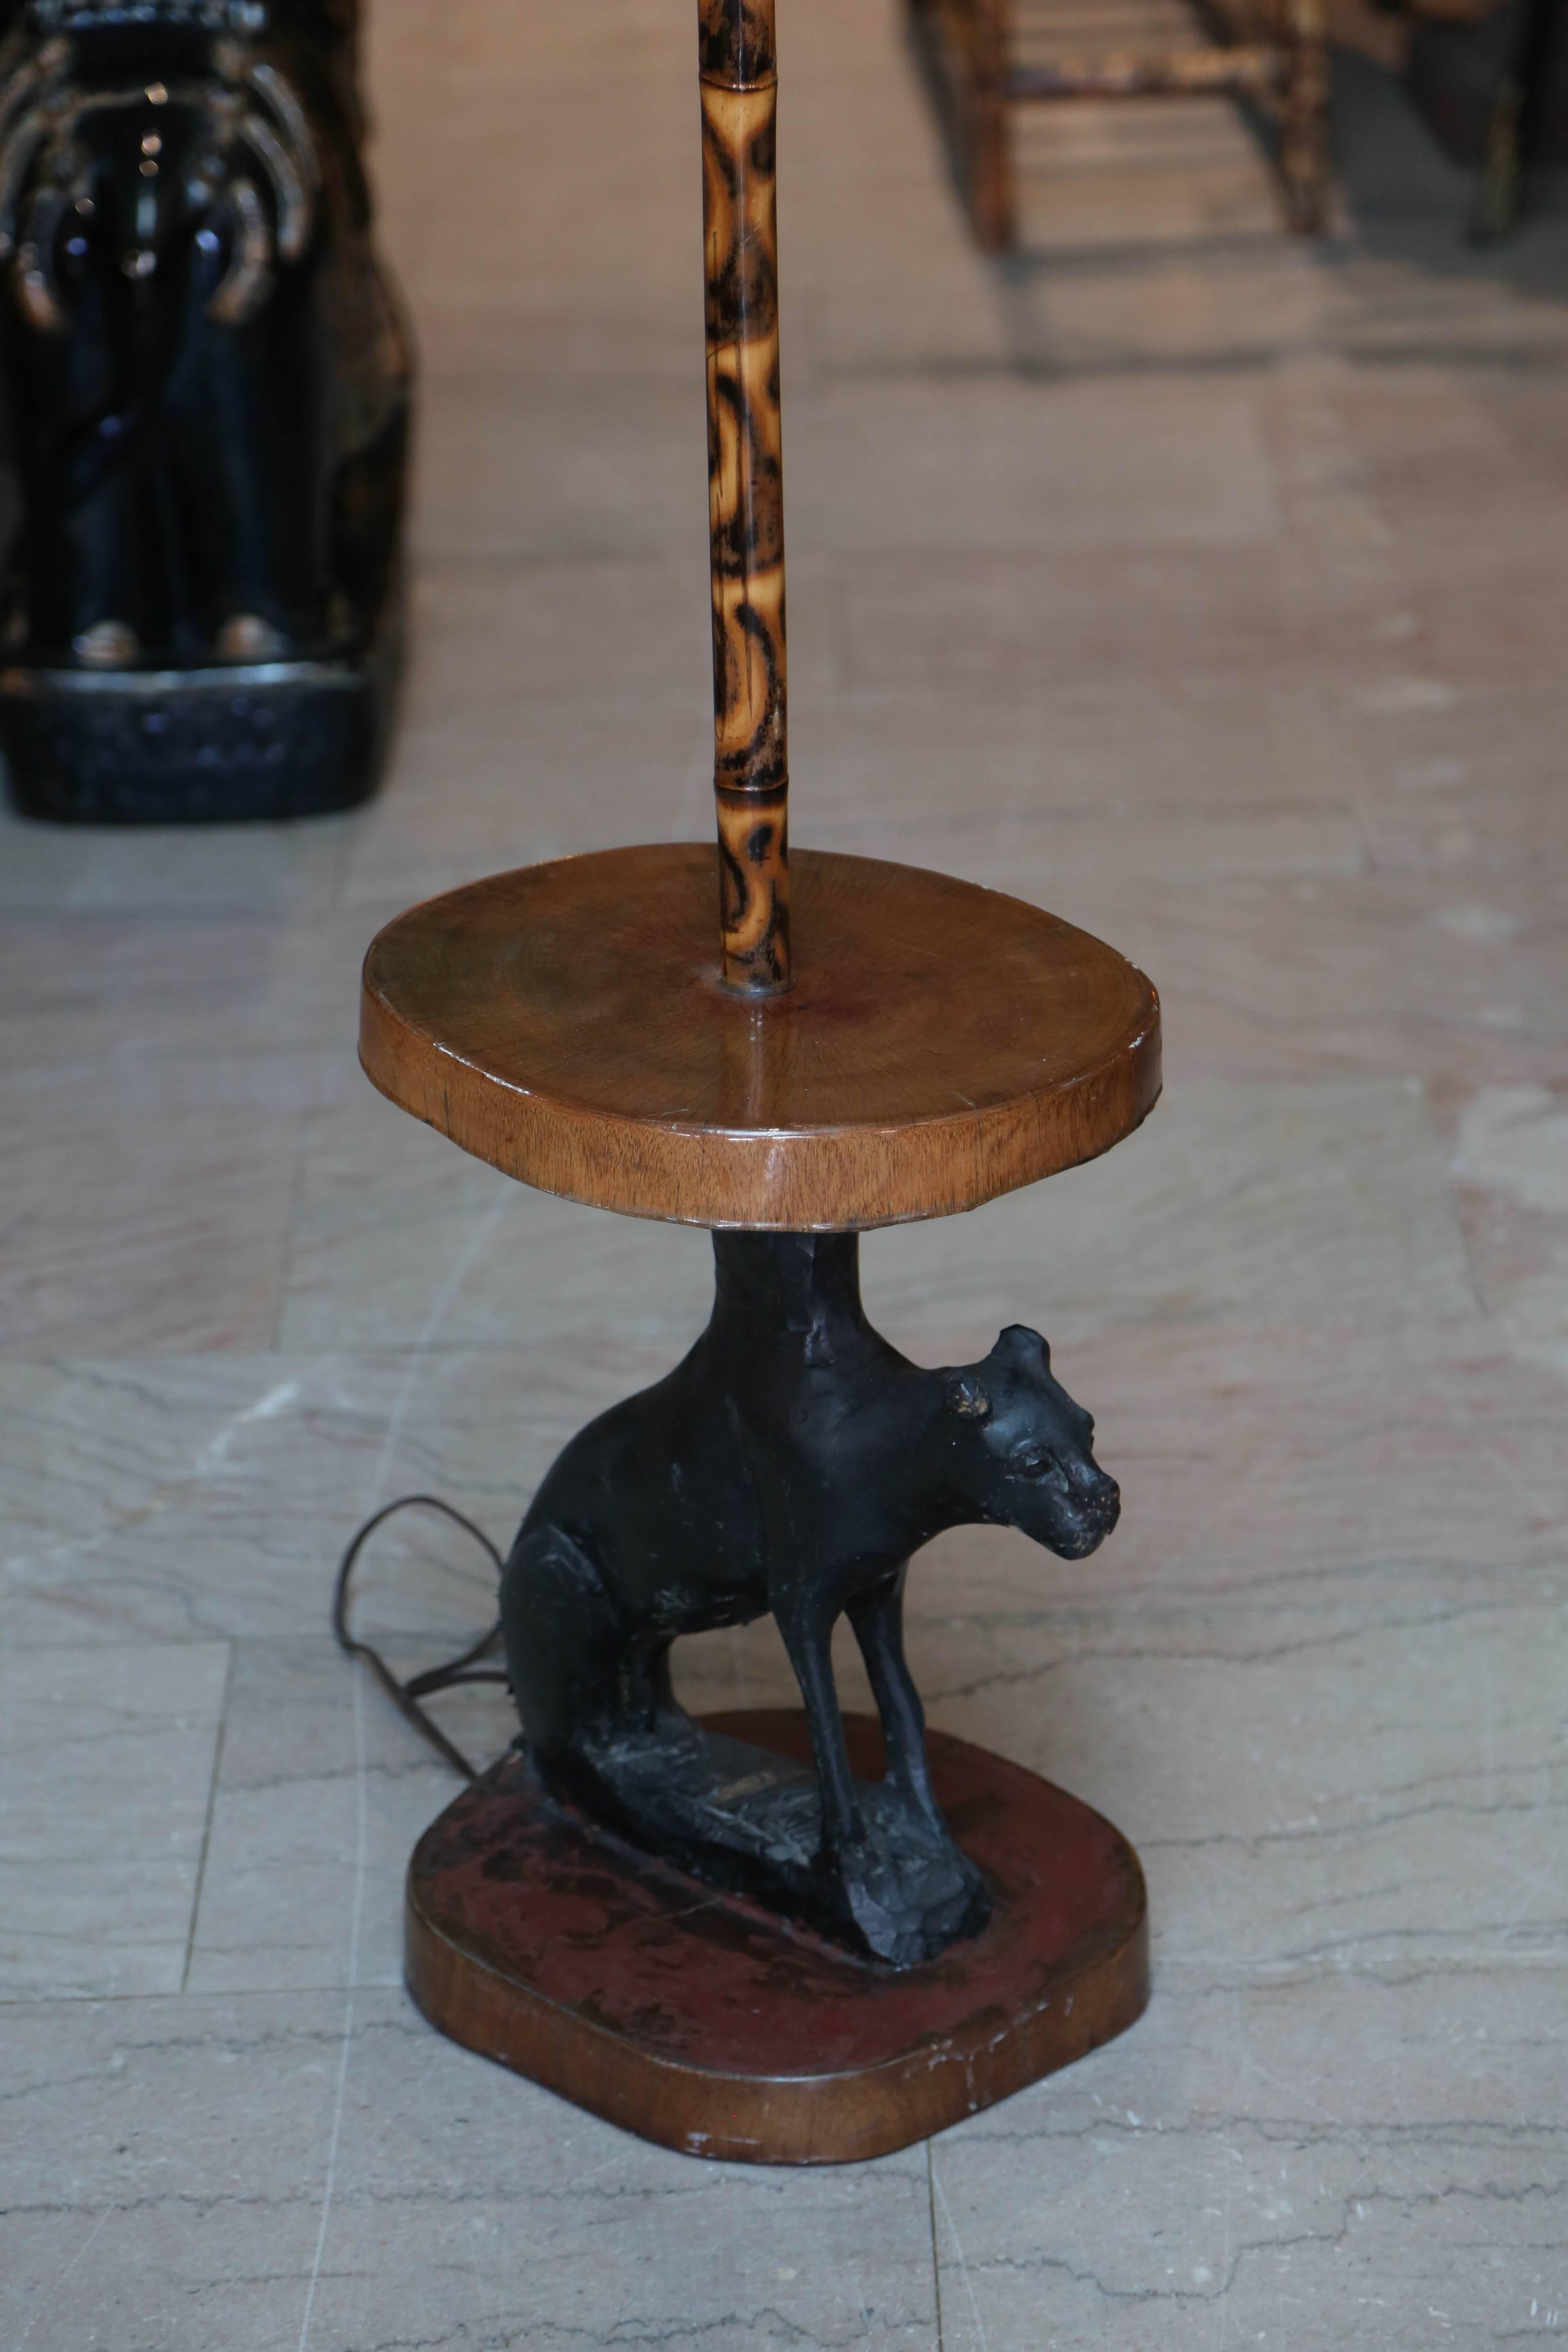 Unusual hand-carved base with the figure of a dog.